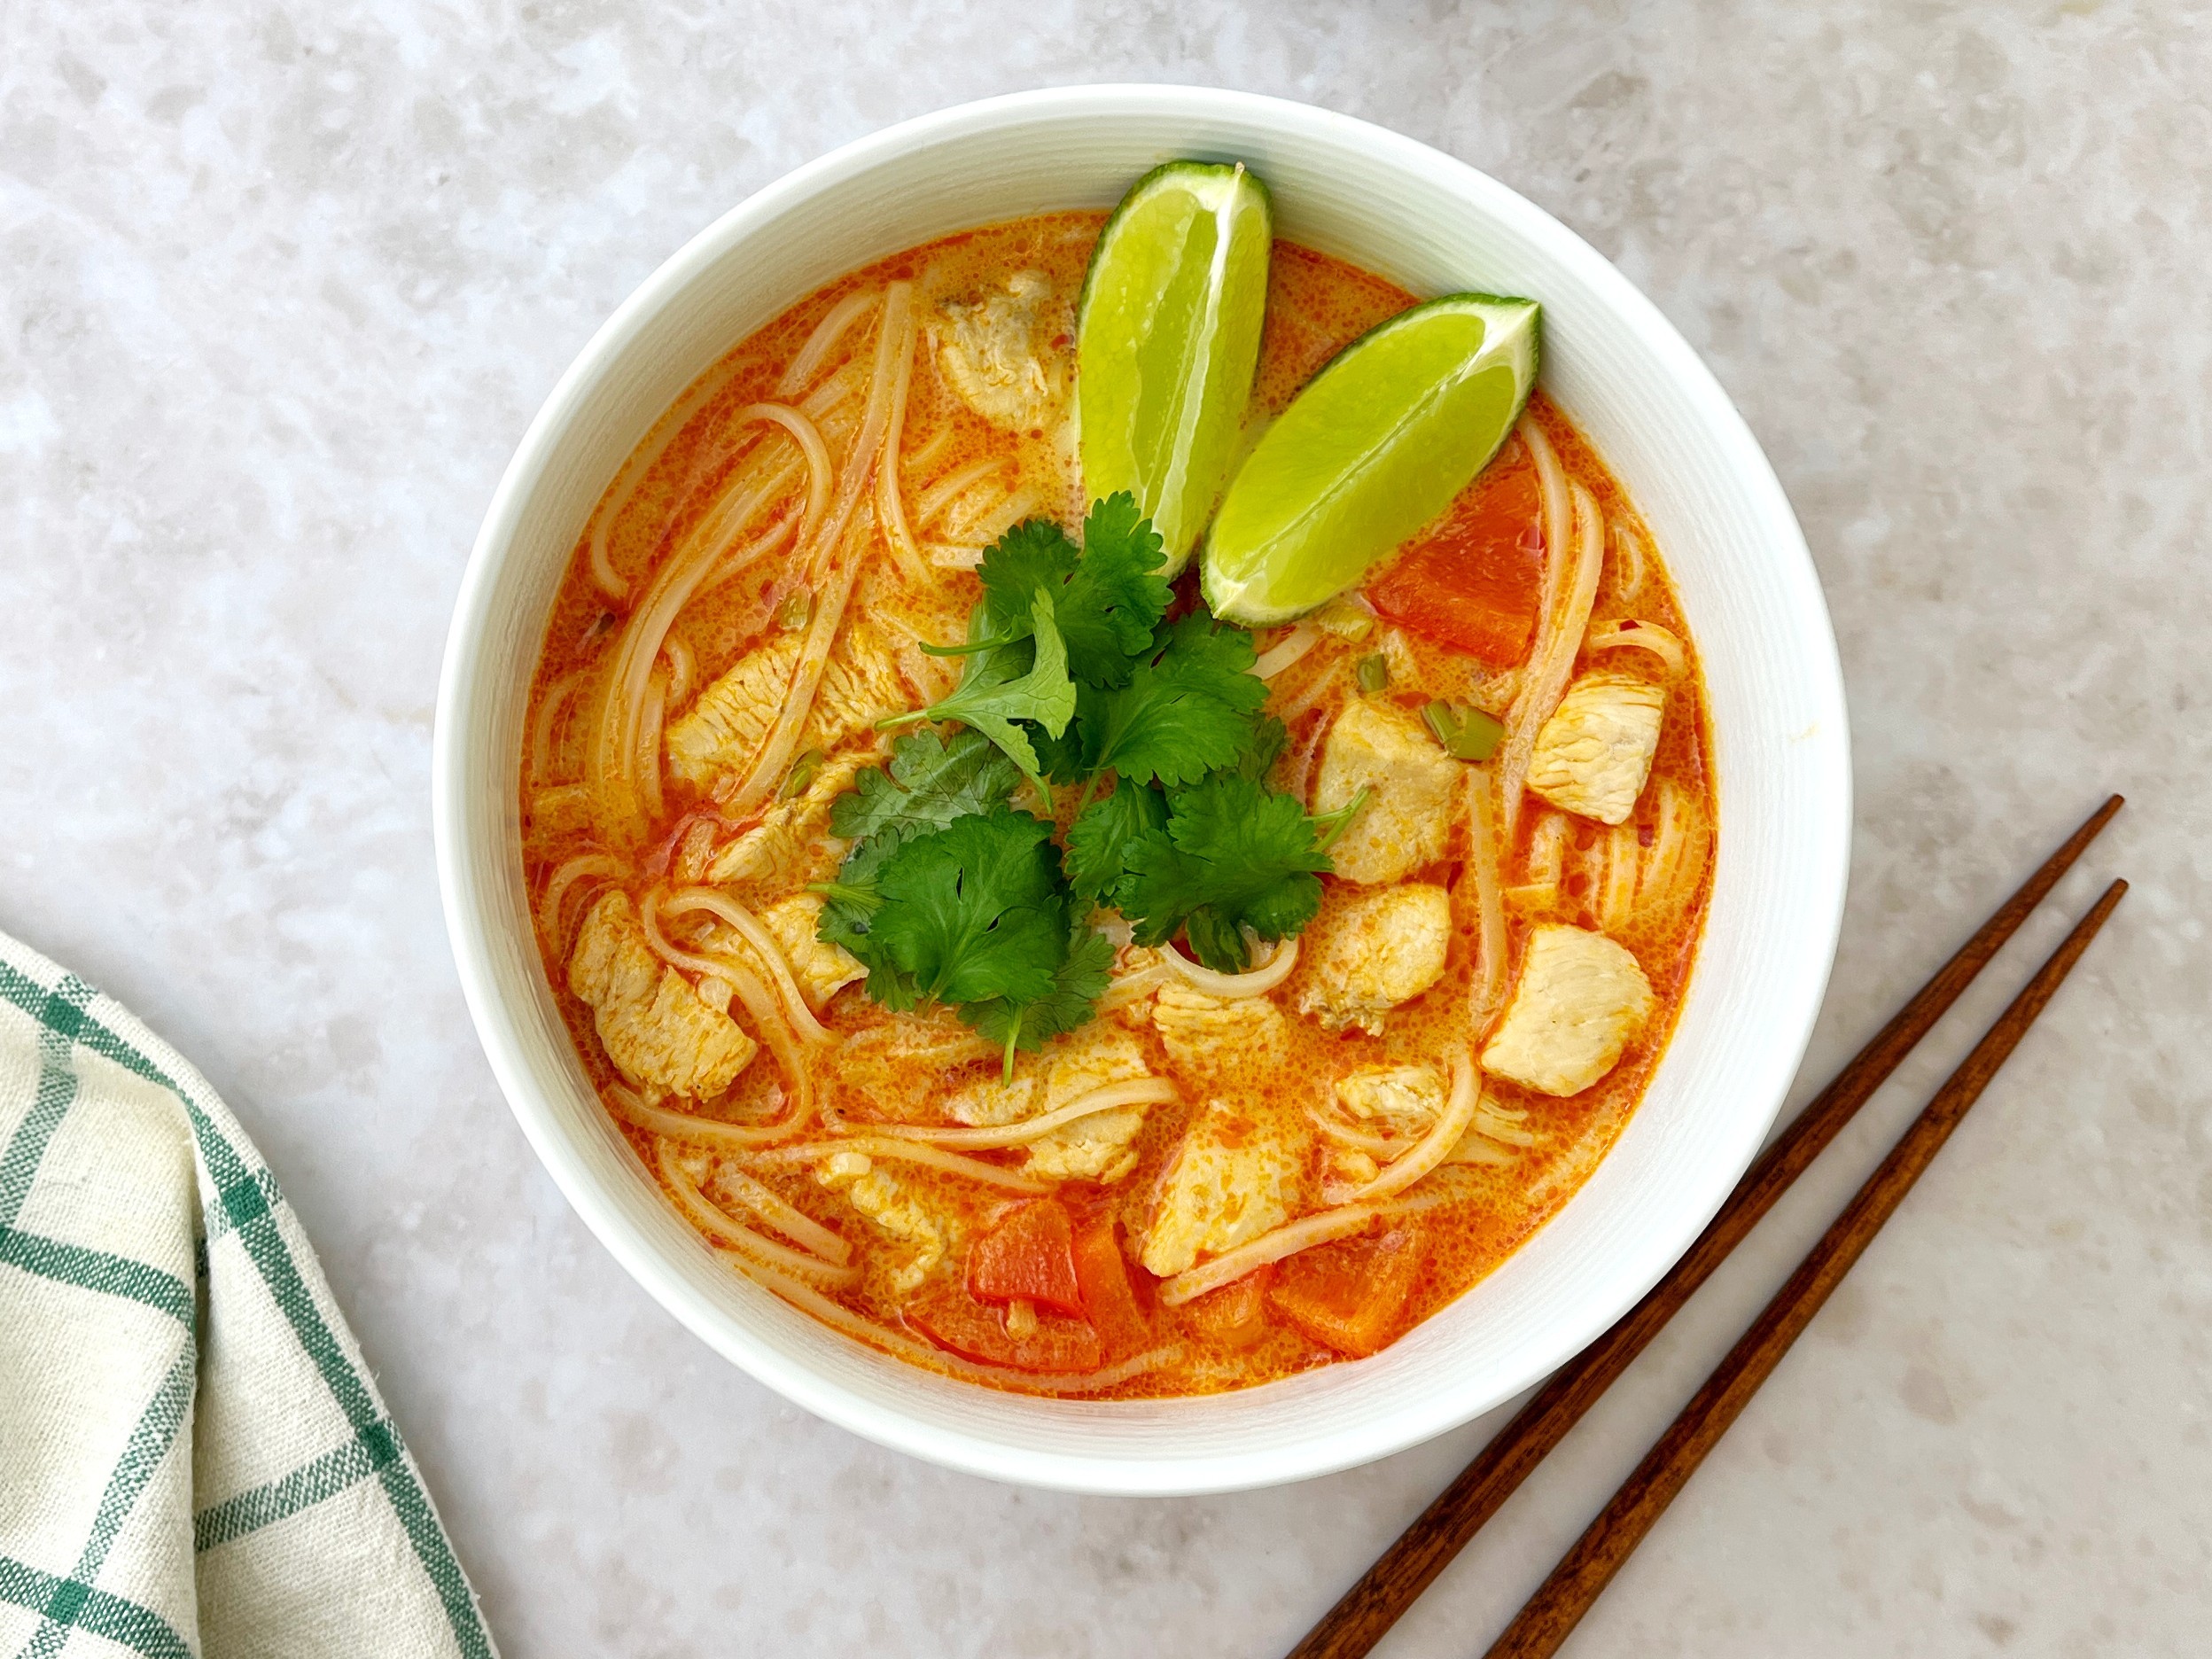 Thai red curry chicken noodle soup